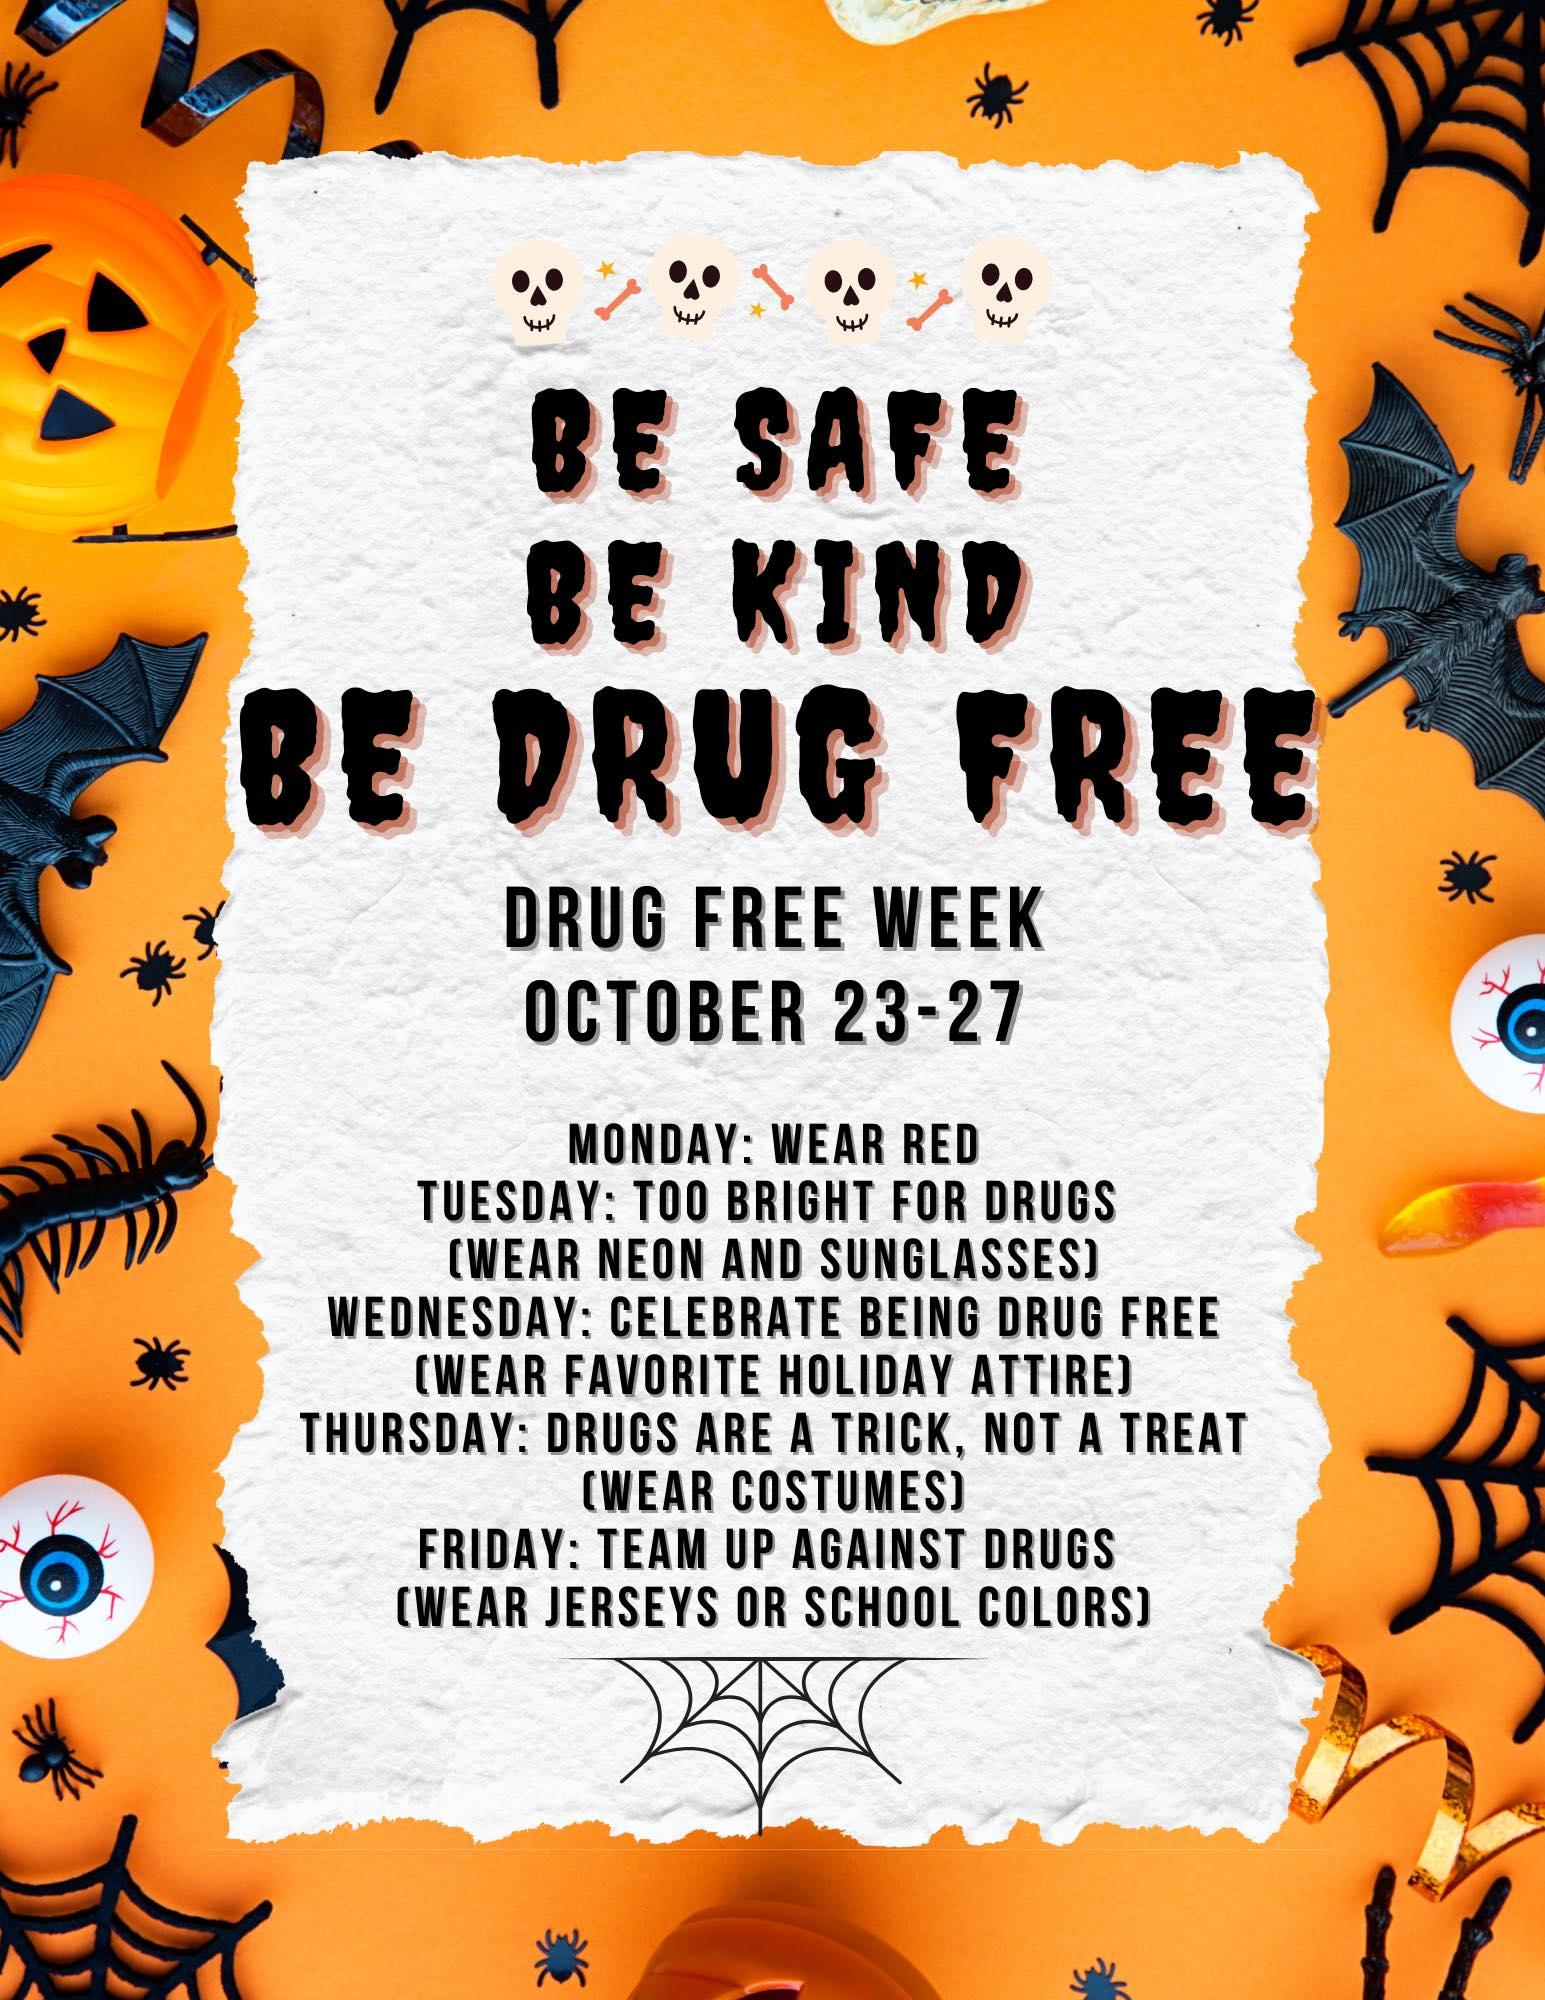 TMS red ribbon week